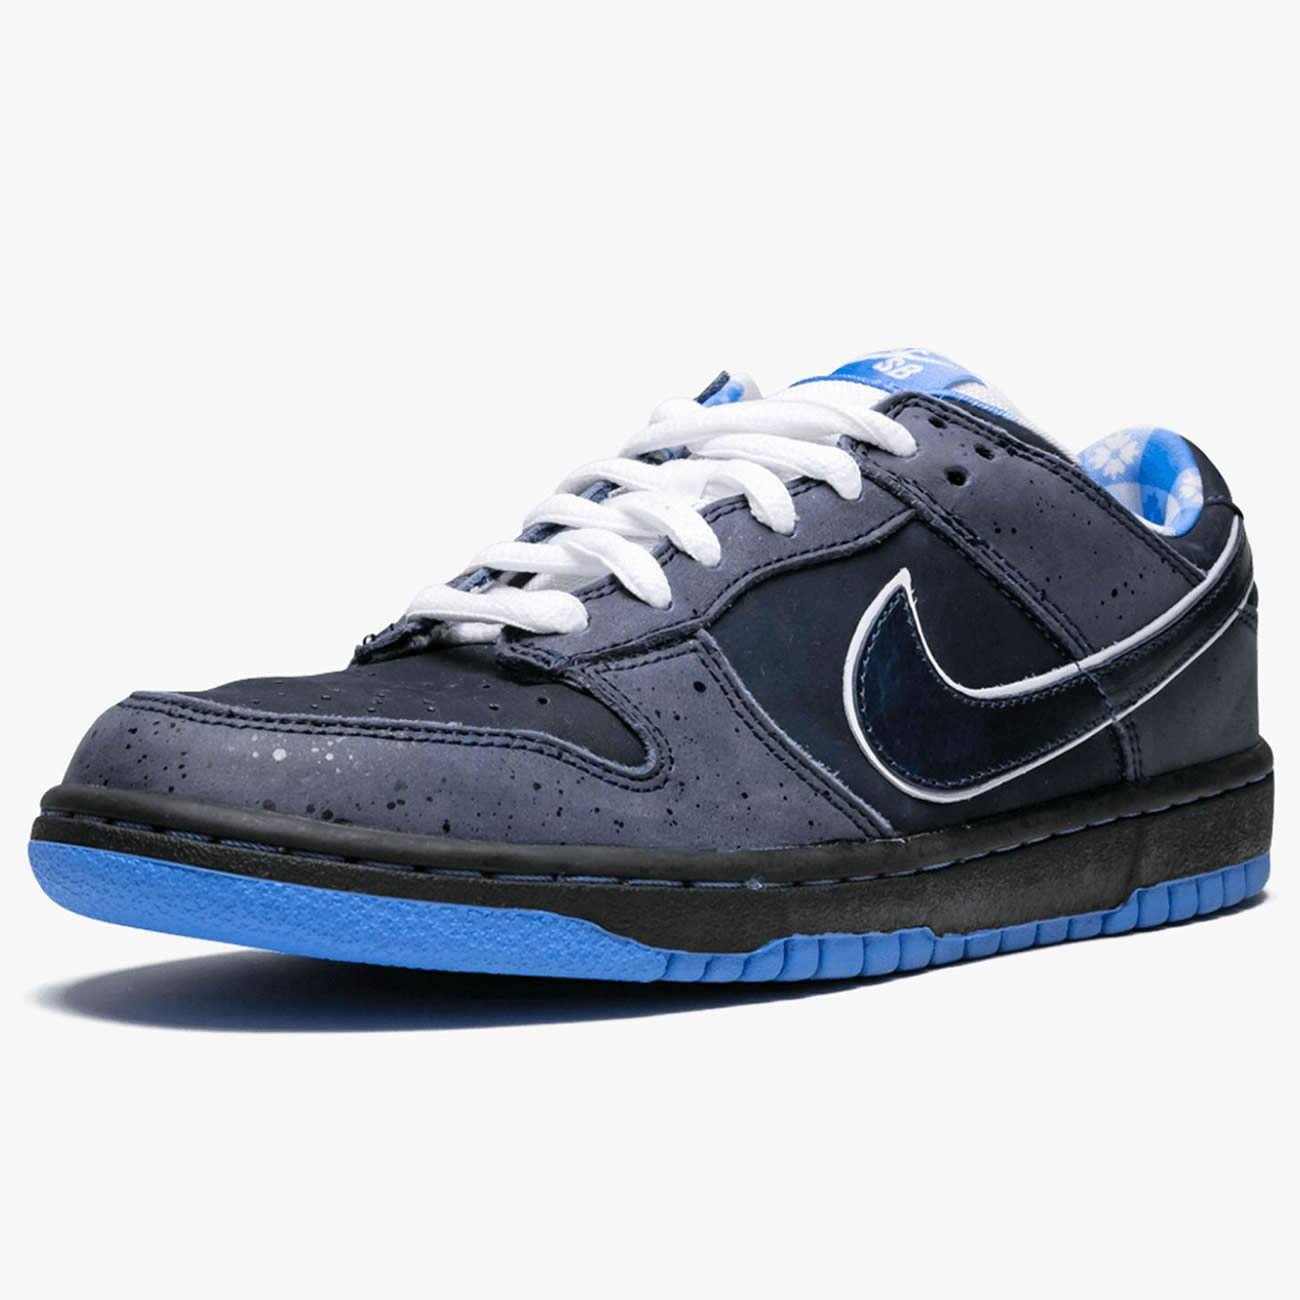 Nike Sb Dunk Low Concepts Bluelobster 313170 342 (4) - newkick.org